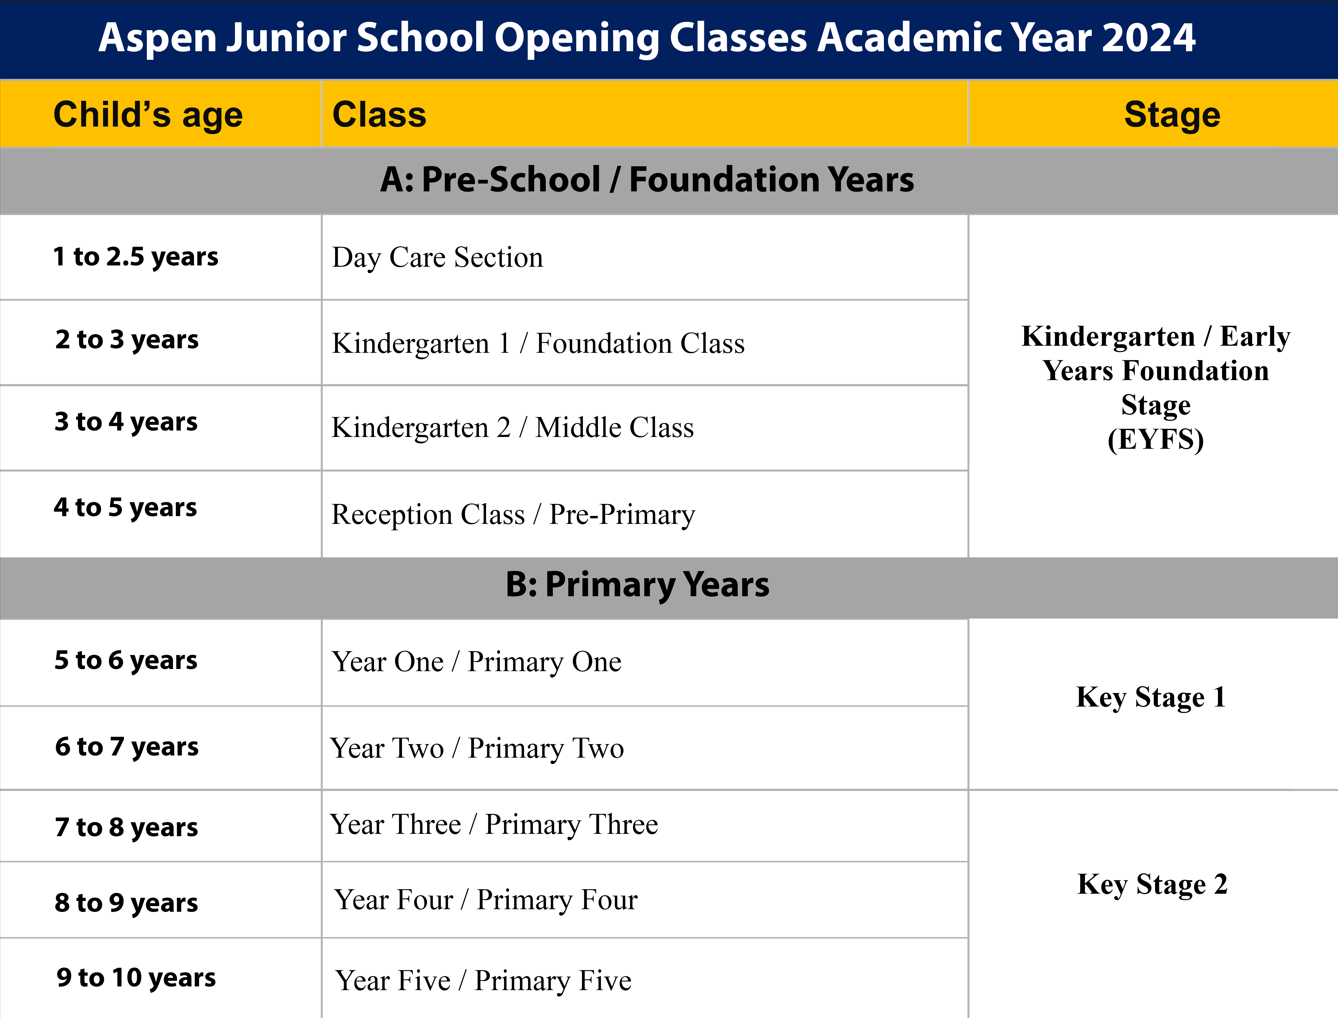 AJS Opening Classes Academic Year 2022